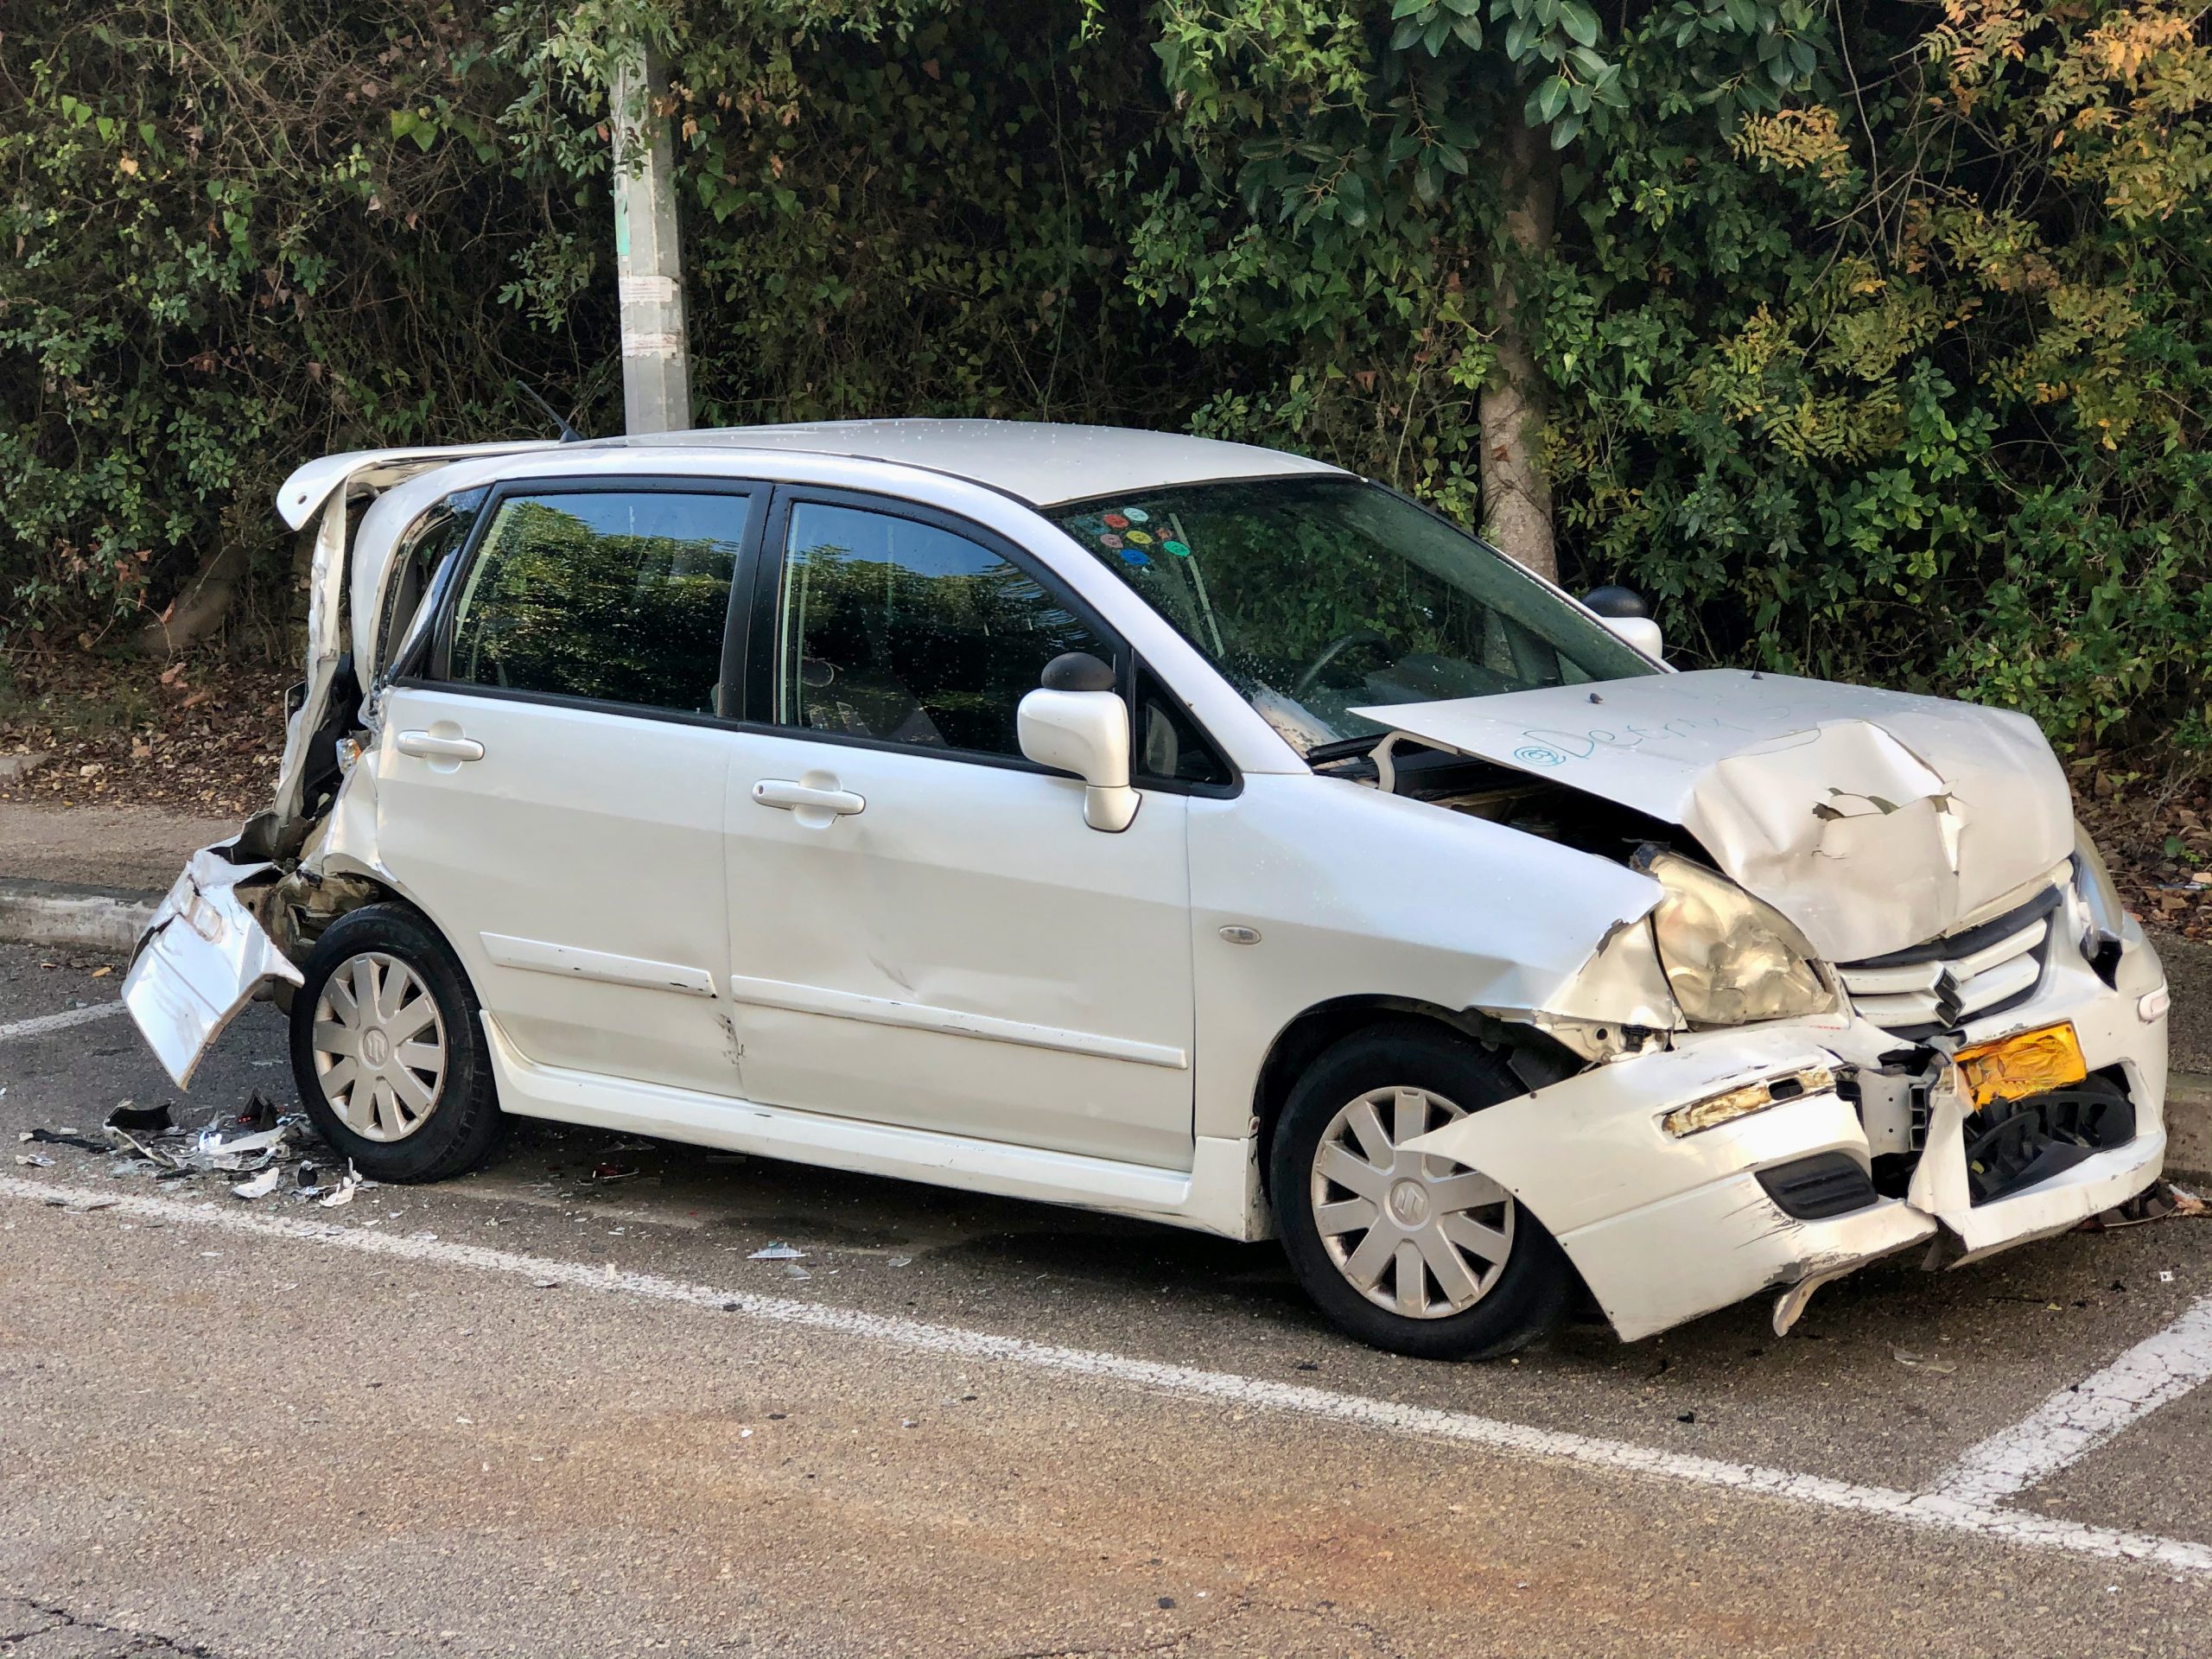 Israel ranks worst in road accidents among OECD countries